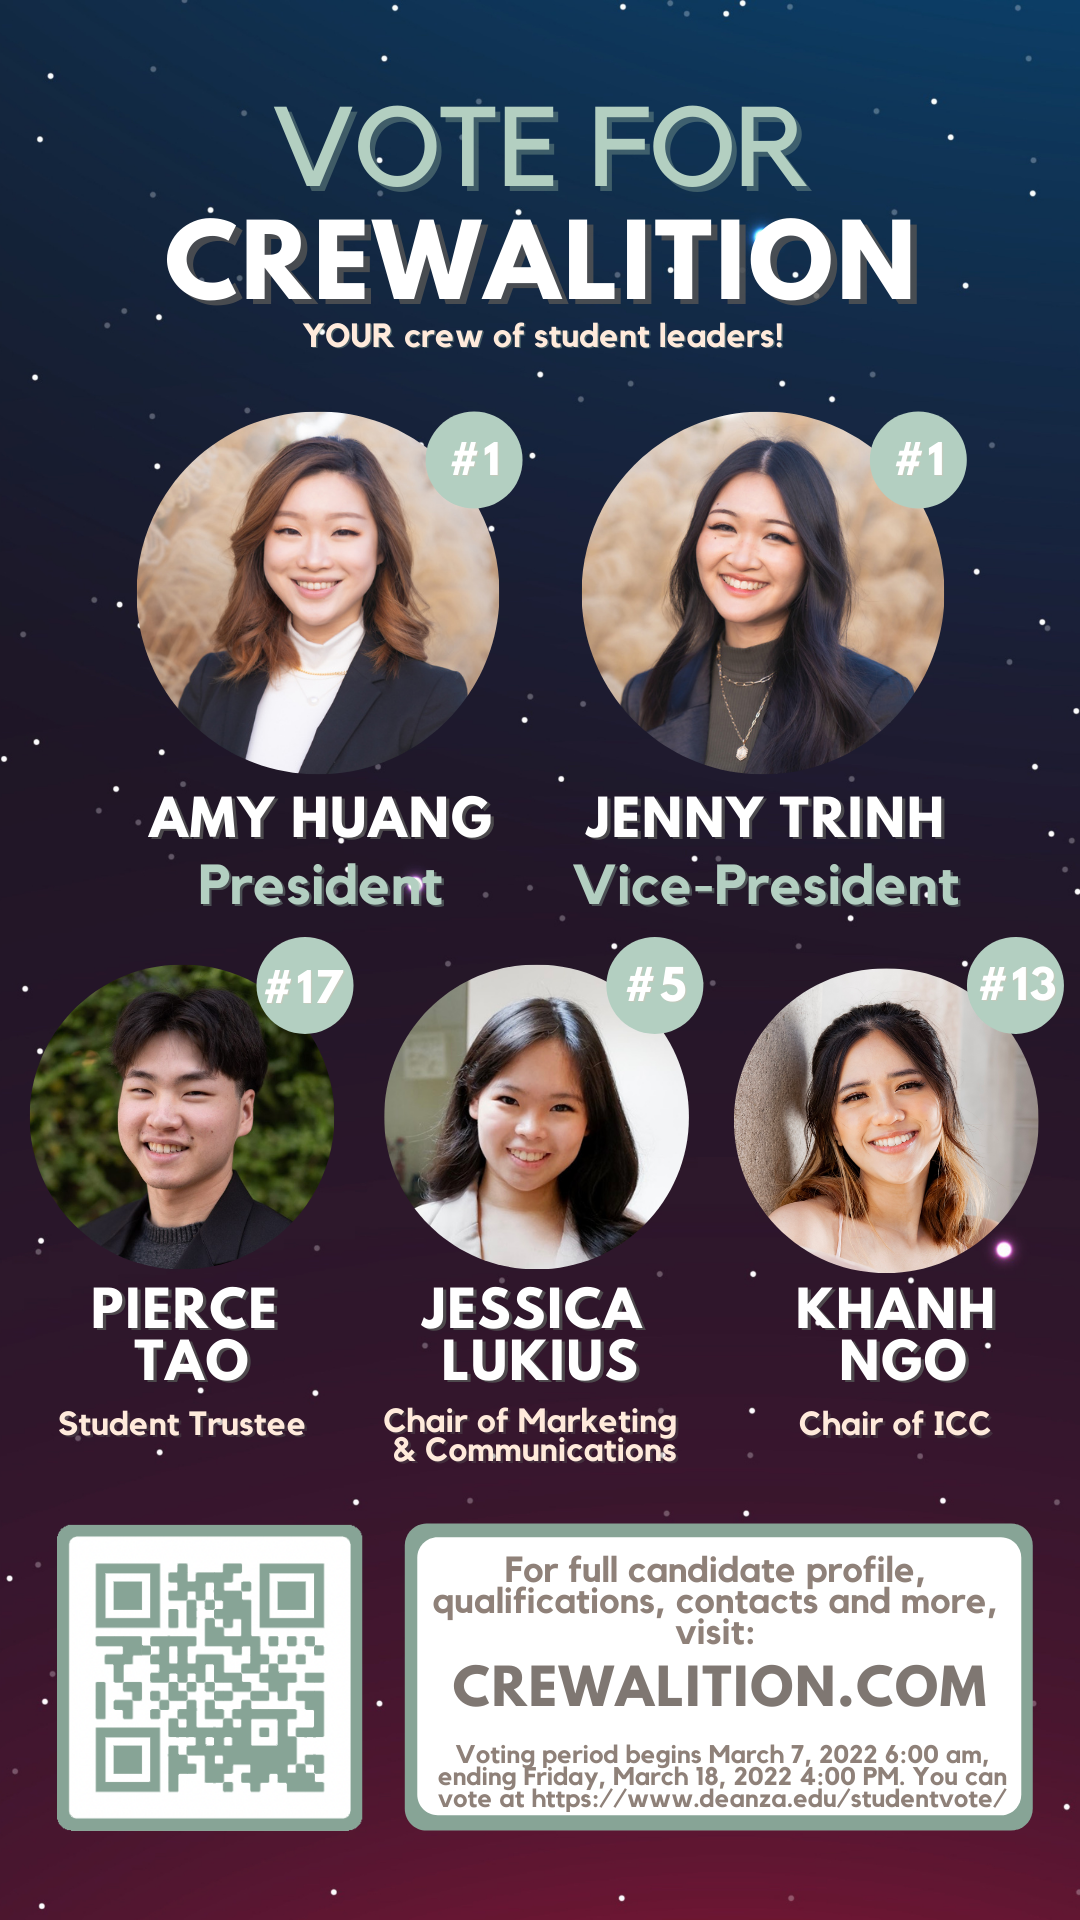 Vote for Crewalition. Your crew of student leaders! # 1 Amy Huang for President and Jenny Trinh for Vice-President # 17 Pierce Tao for Student Trustee # 5 Jessica Lukius for Chair of Marketing and Communications # 13 Khan Ngo for Chair of ICC. For full candidate profile, qualifications, contacts and more, visit: crewalition.com. Voting period begins March 7, 2022 6:00 am, ending Friday, March18, 2022 4:00 pm. You can vote at https://www.deanza.edu/studentvote/